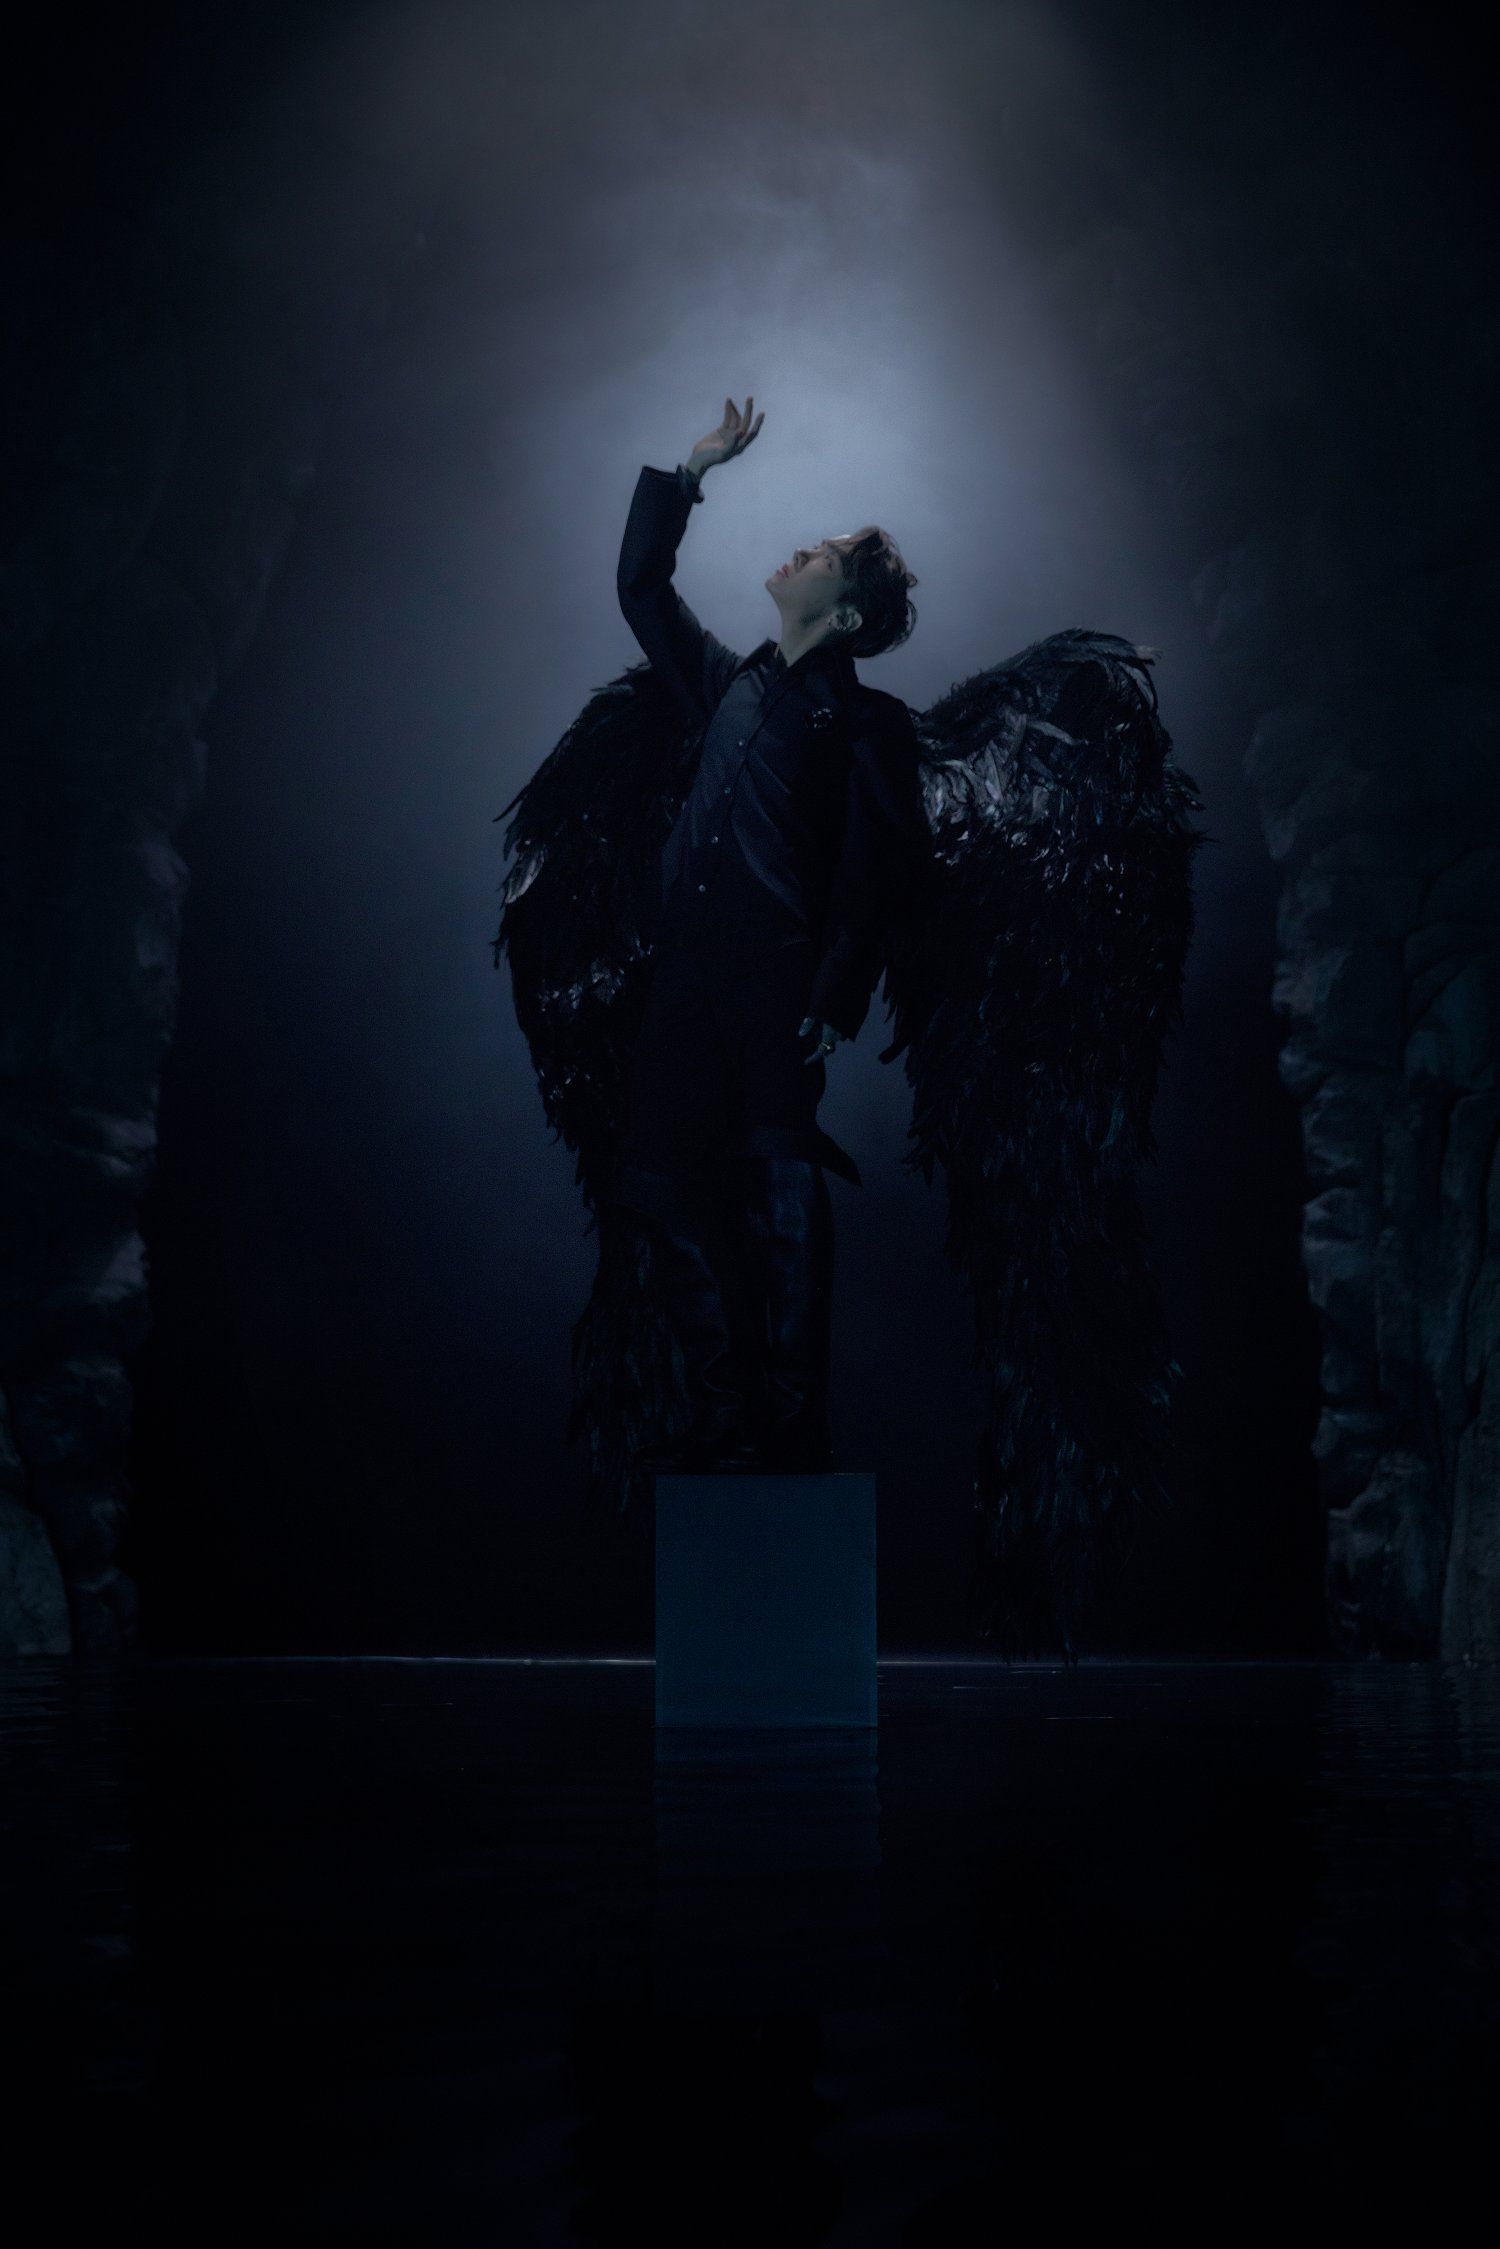 BTS Transforms Into Black Swans For “Map Of The Soul: 7” Concept Photo